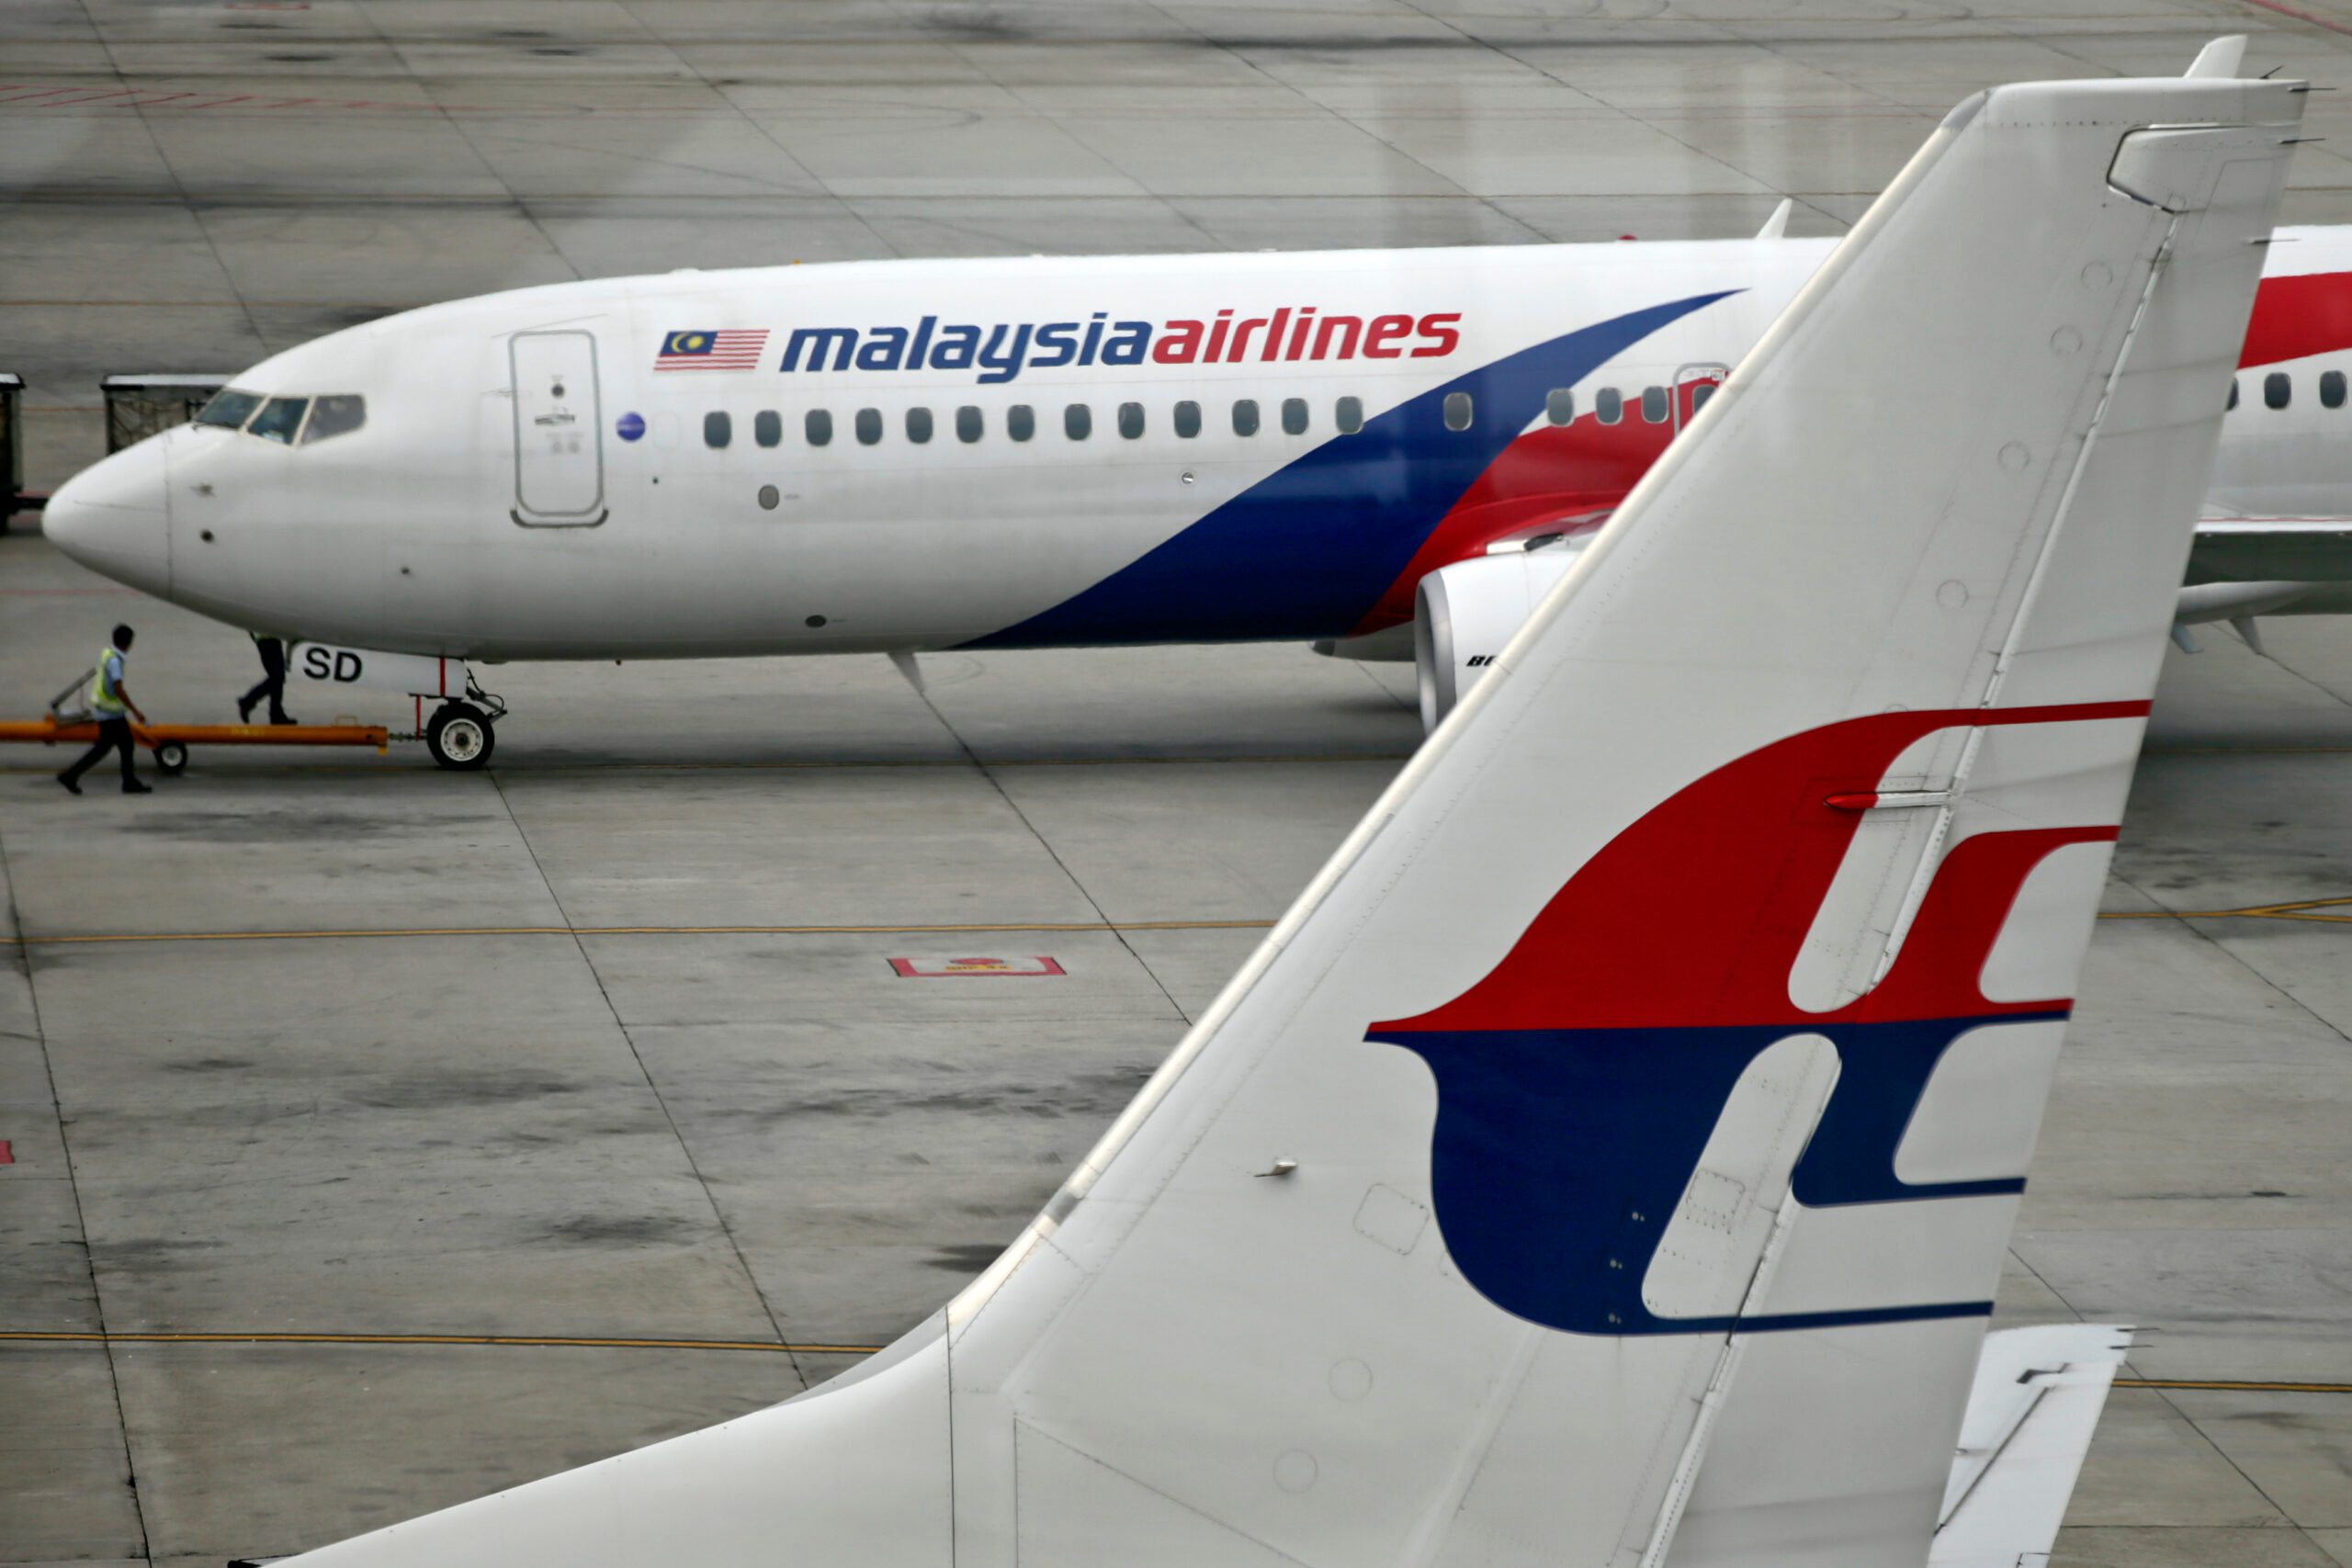 MH370 widow, sons sue Malaysia Airlines in Australia